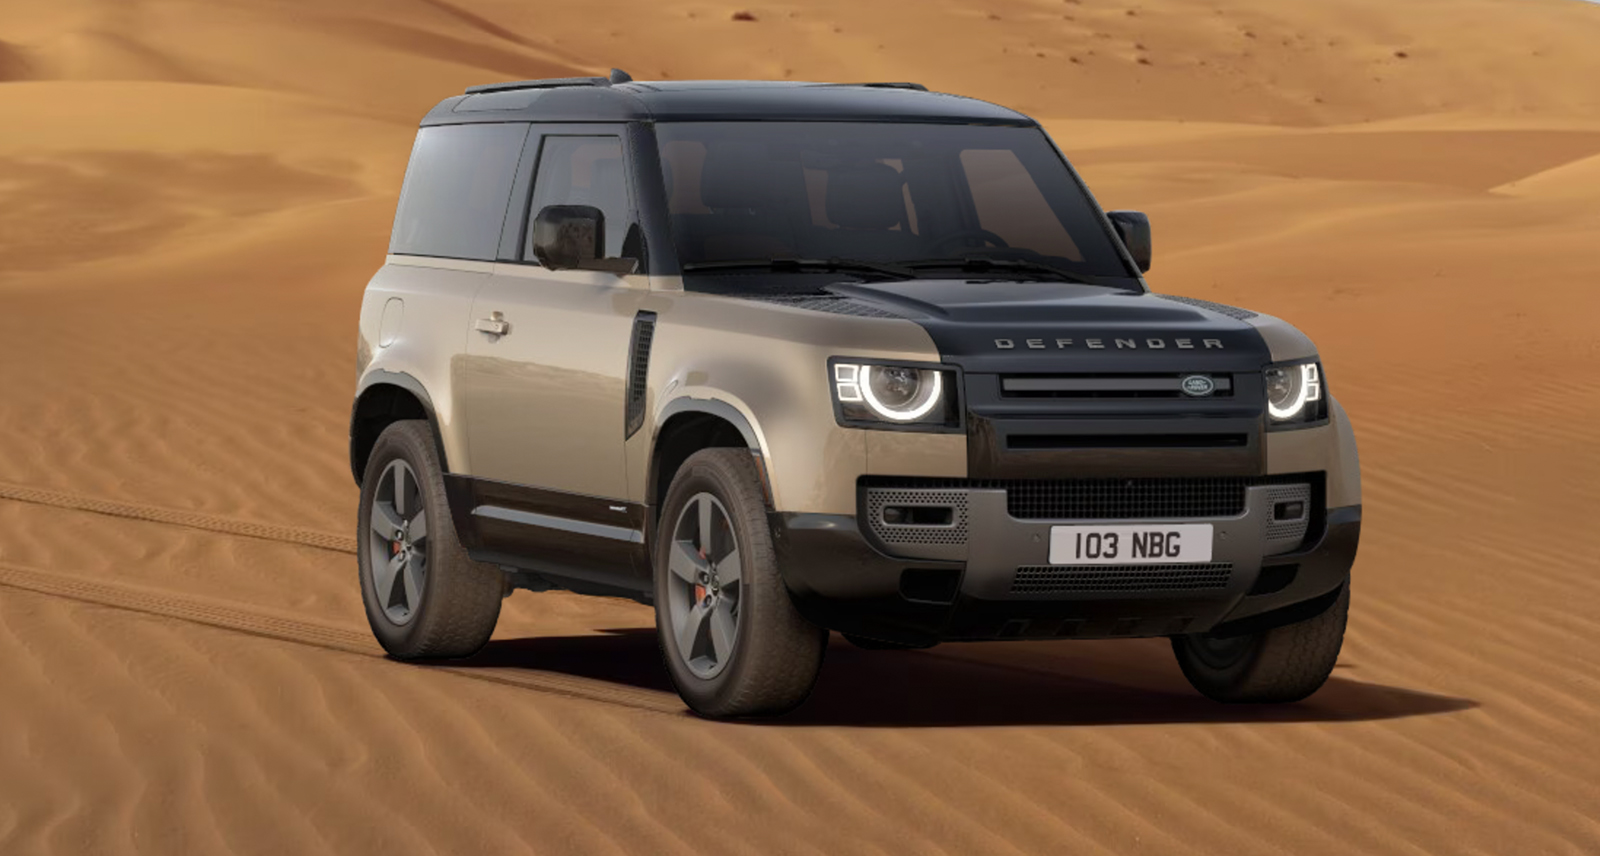 SHARP built Land Rover Defender parked in a desert shot from the front right corner